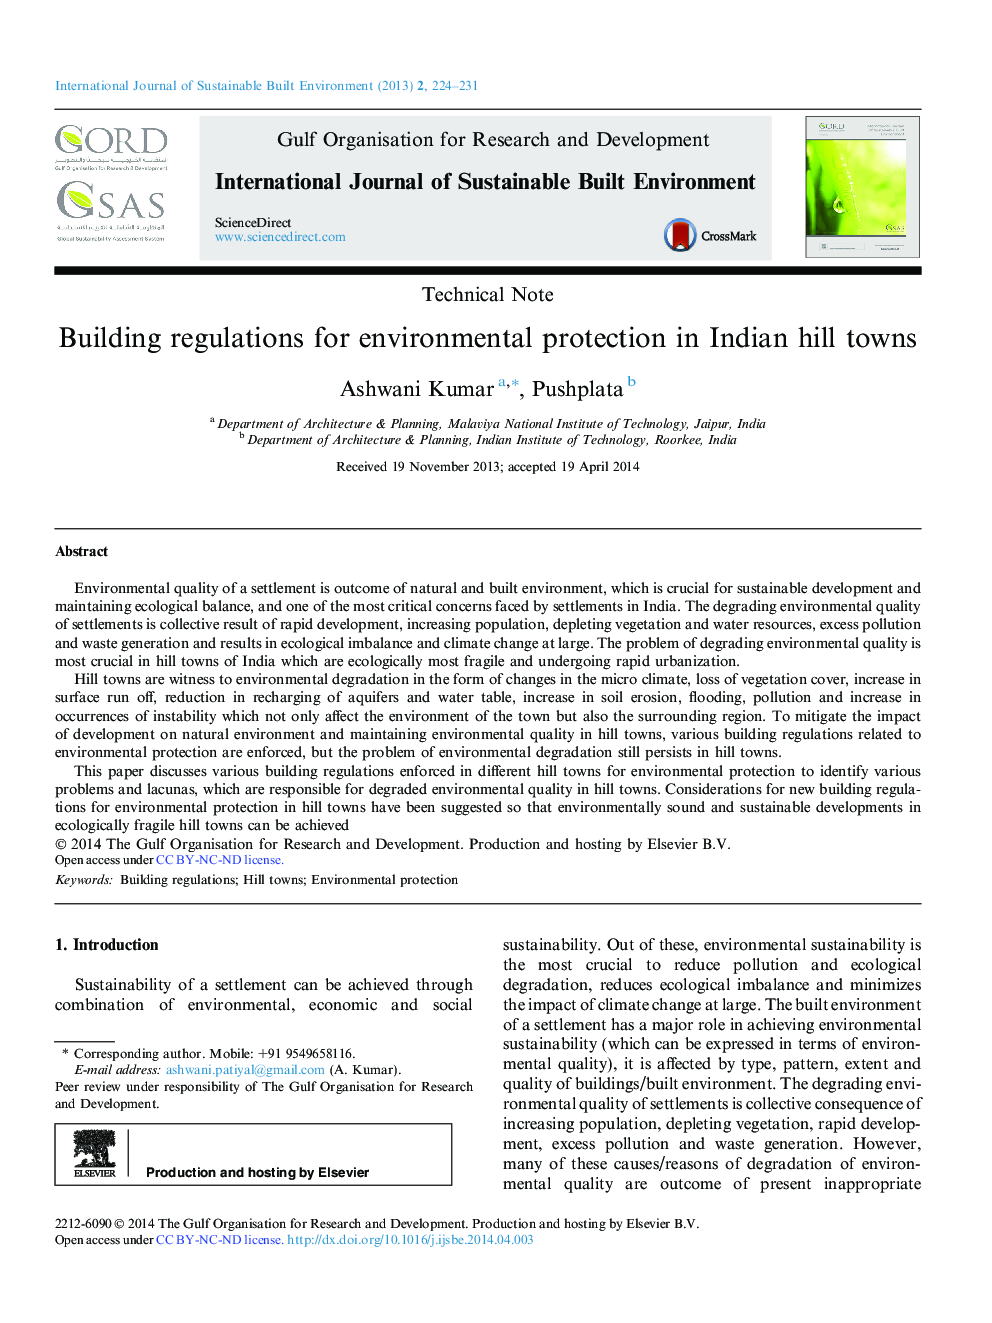 Building regulations for environmental protection in Indian hill towns 